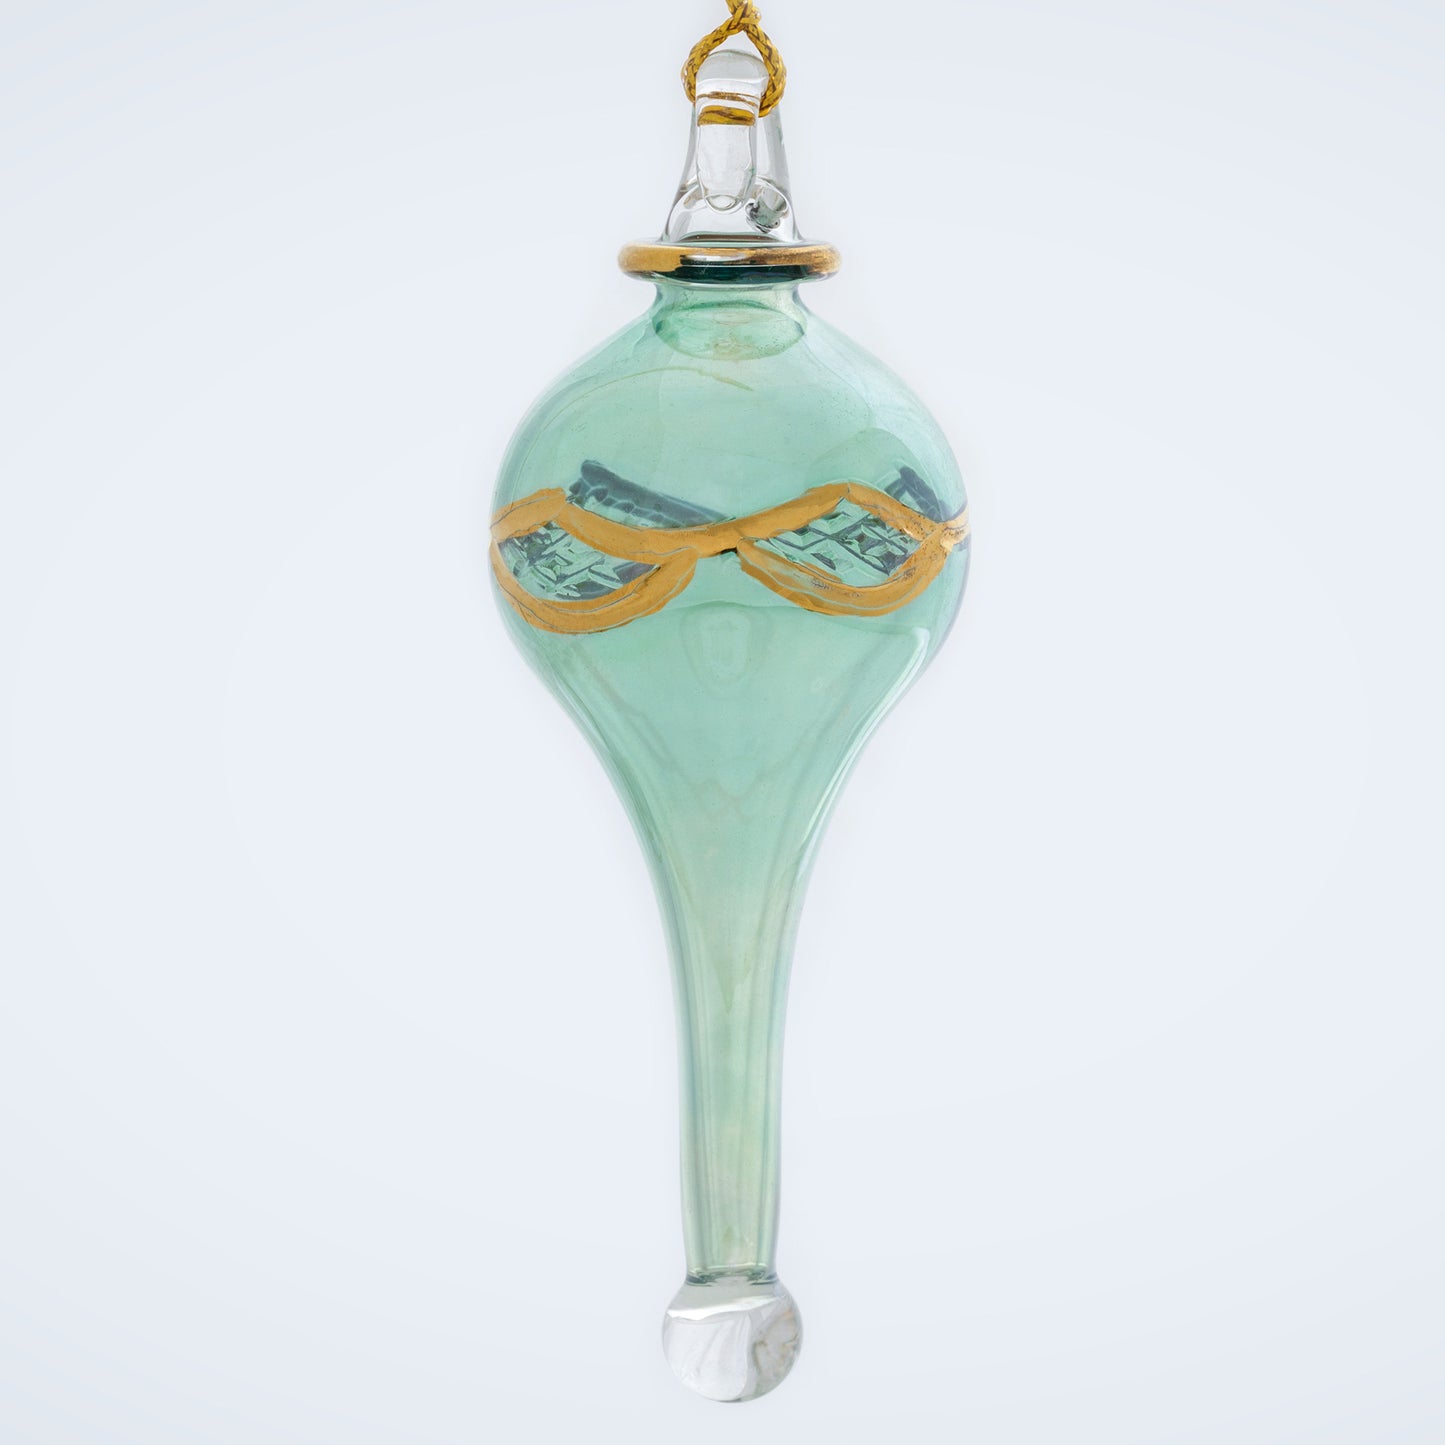 Egyptian Museum Etched Multi Color Glass Handmade Ornament